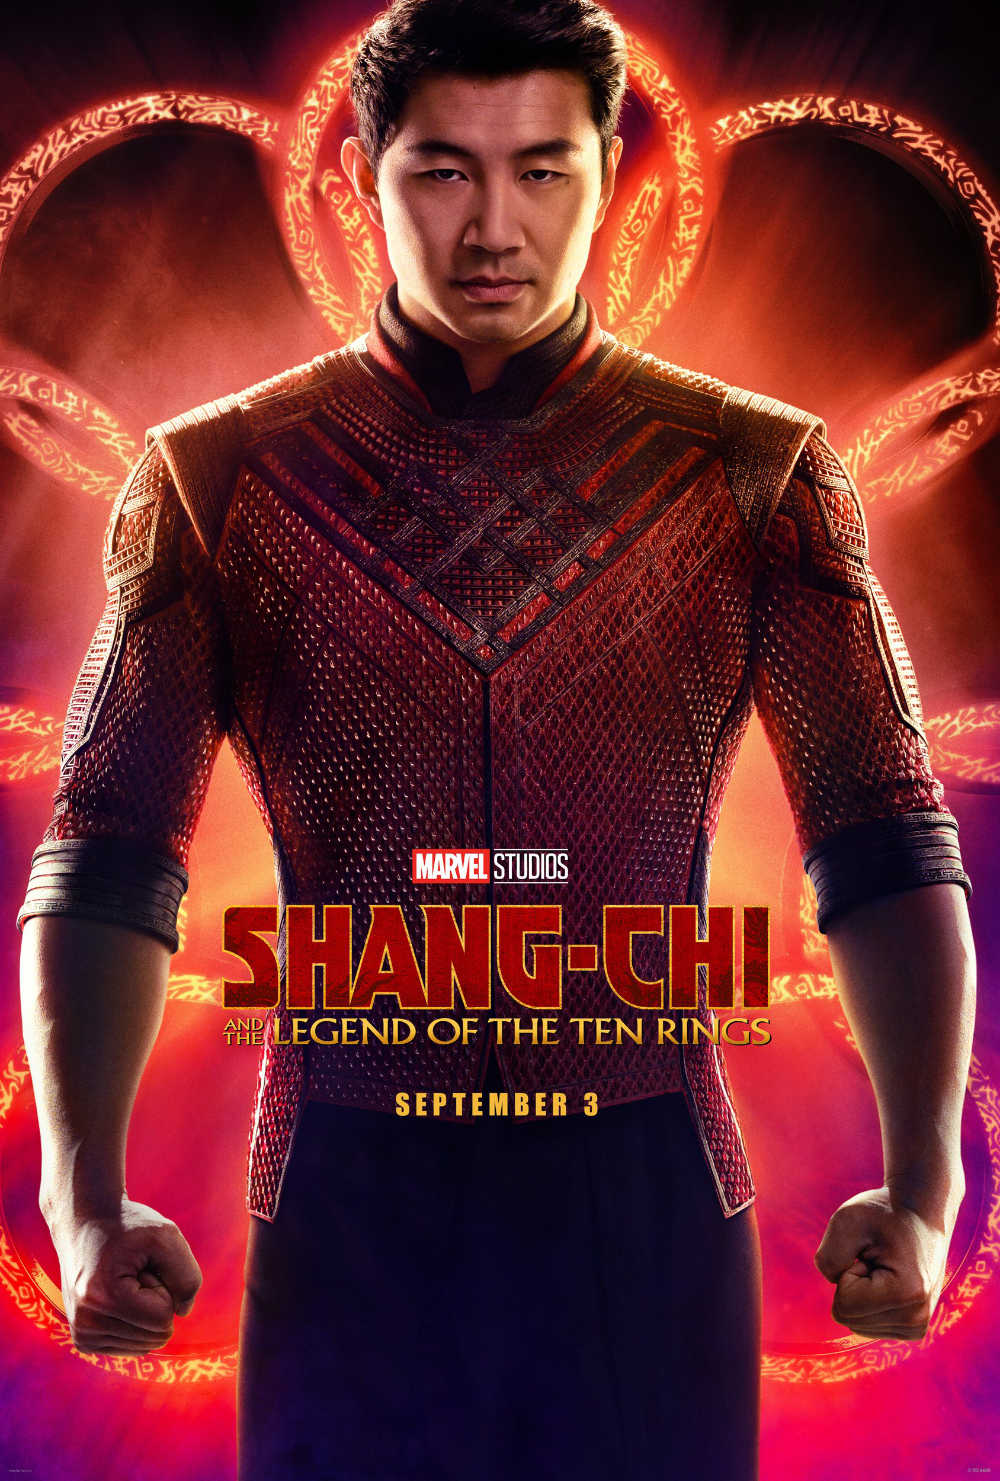 You are currently viewing Notes On A Film: Shang-Chi